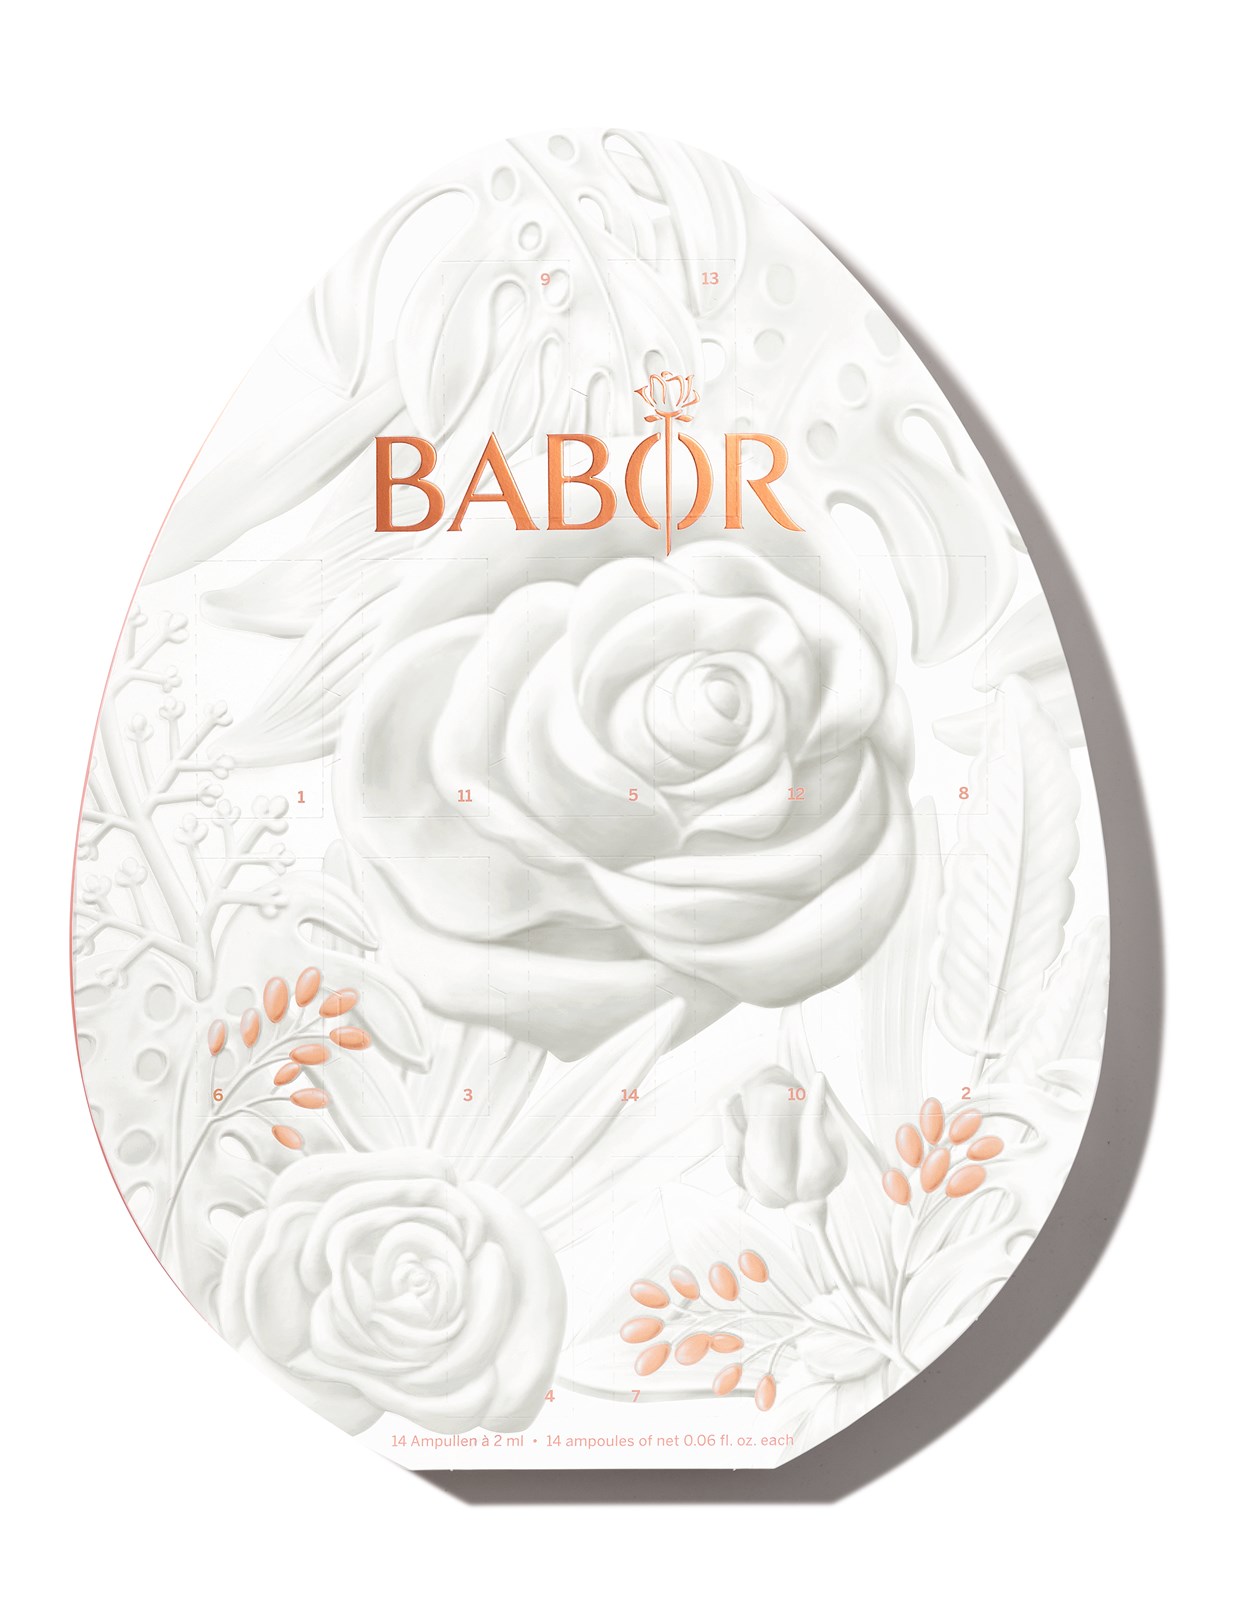 BABOR Ampoule Concentrates Easter Egg 2022